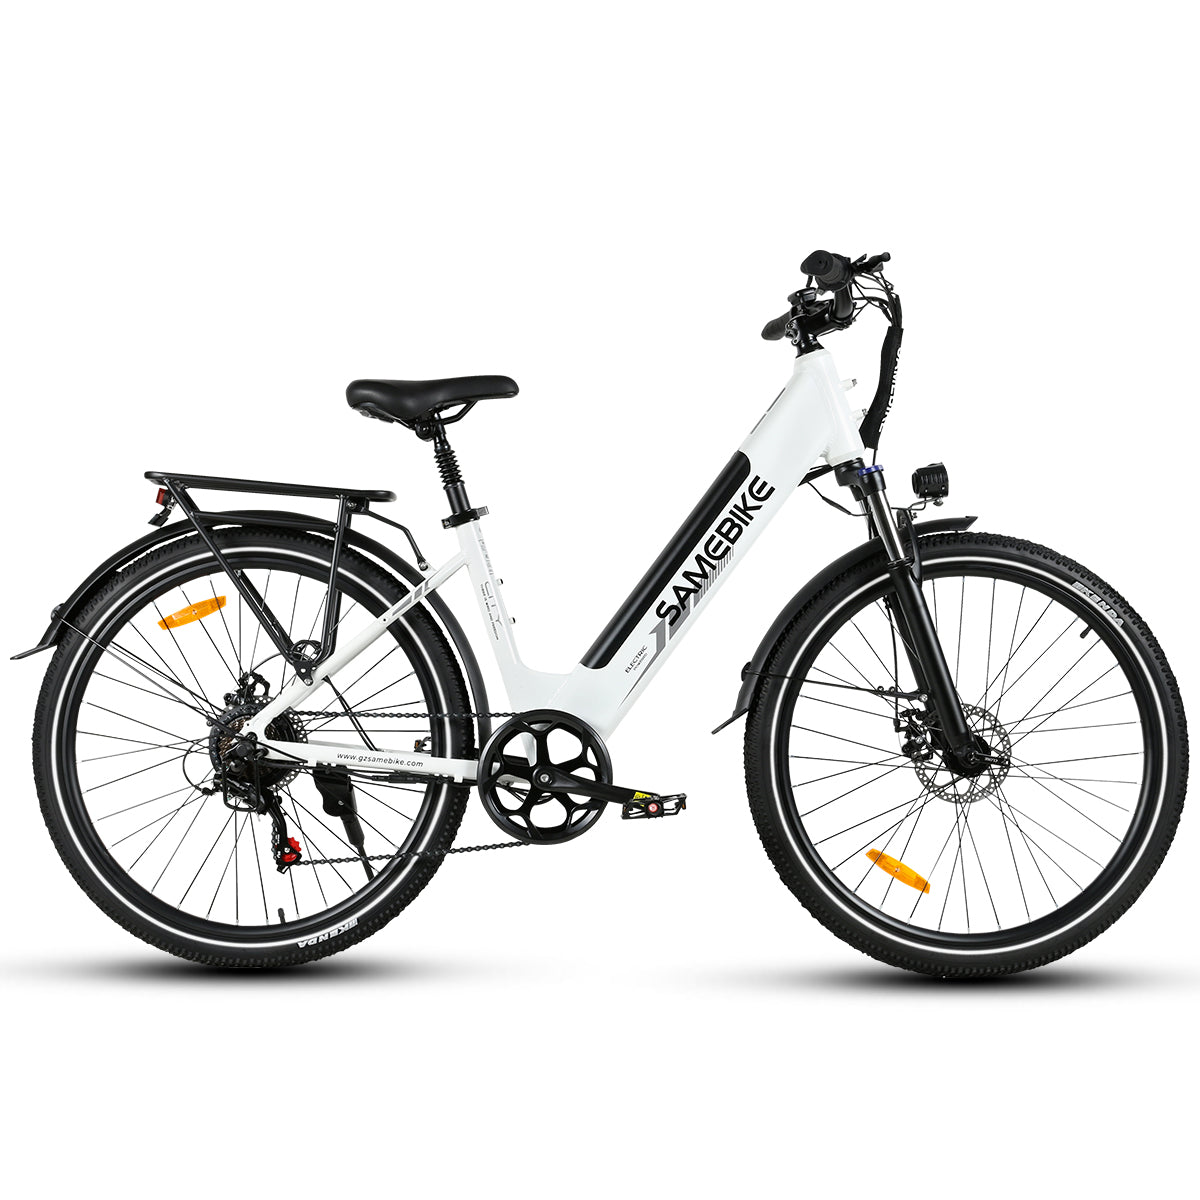 SAMBIKE RS-A01 PRO Electric Bike - 500W Motor, 32 km/h, 27.5" Tires, Dual Suspension